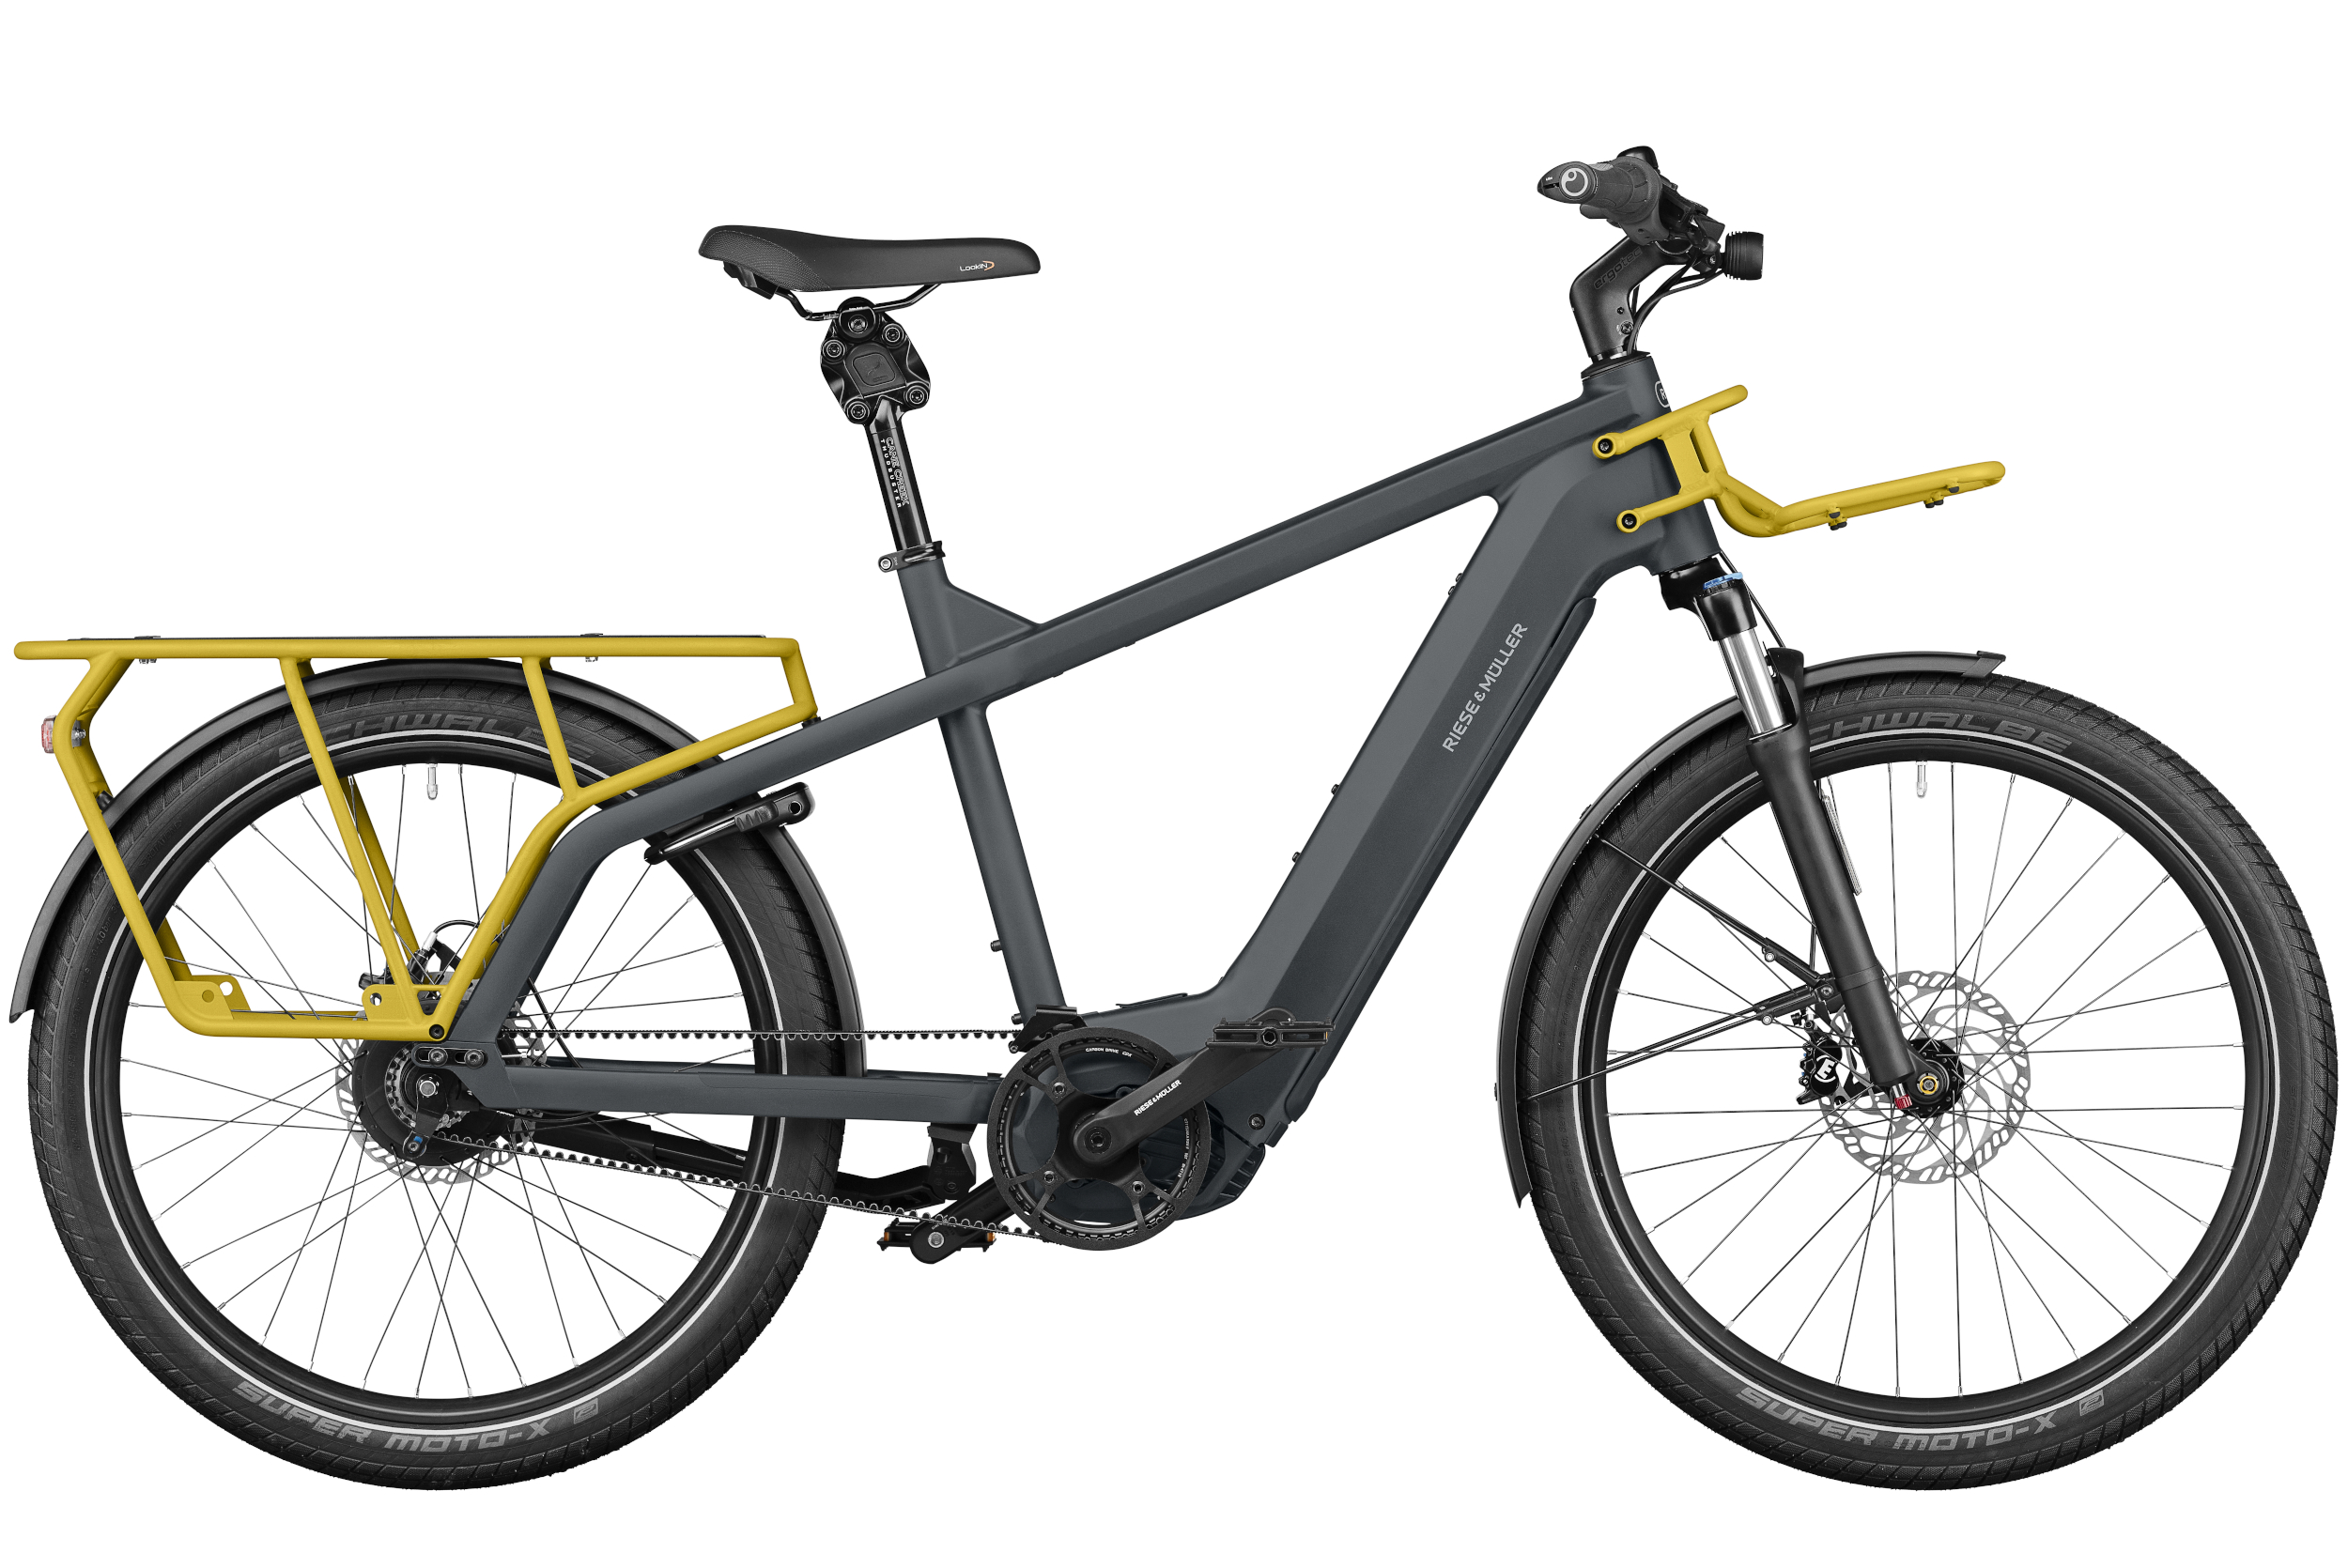 Riese & Müller Multicharger GT vario 51cm, 625Wh